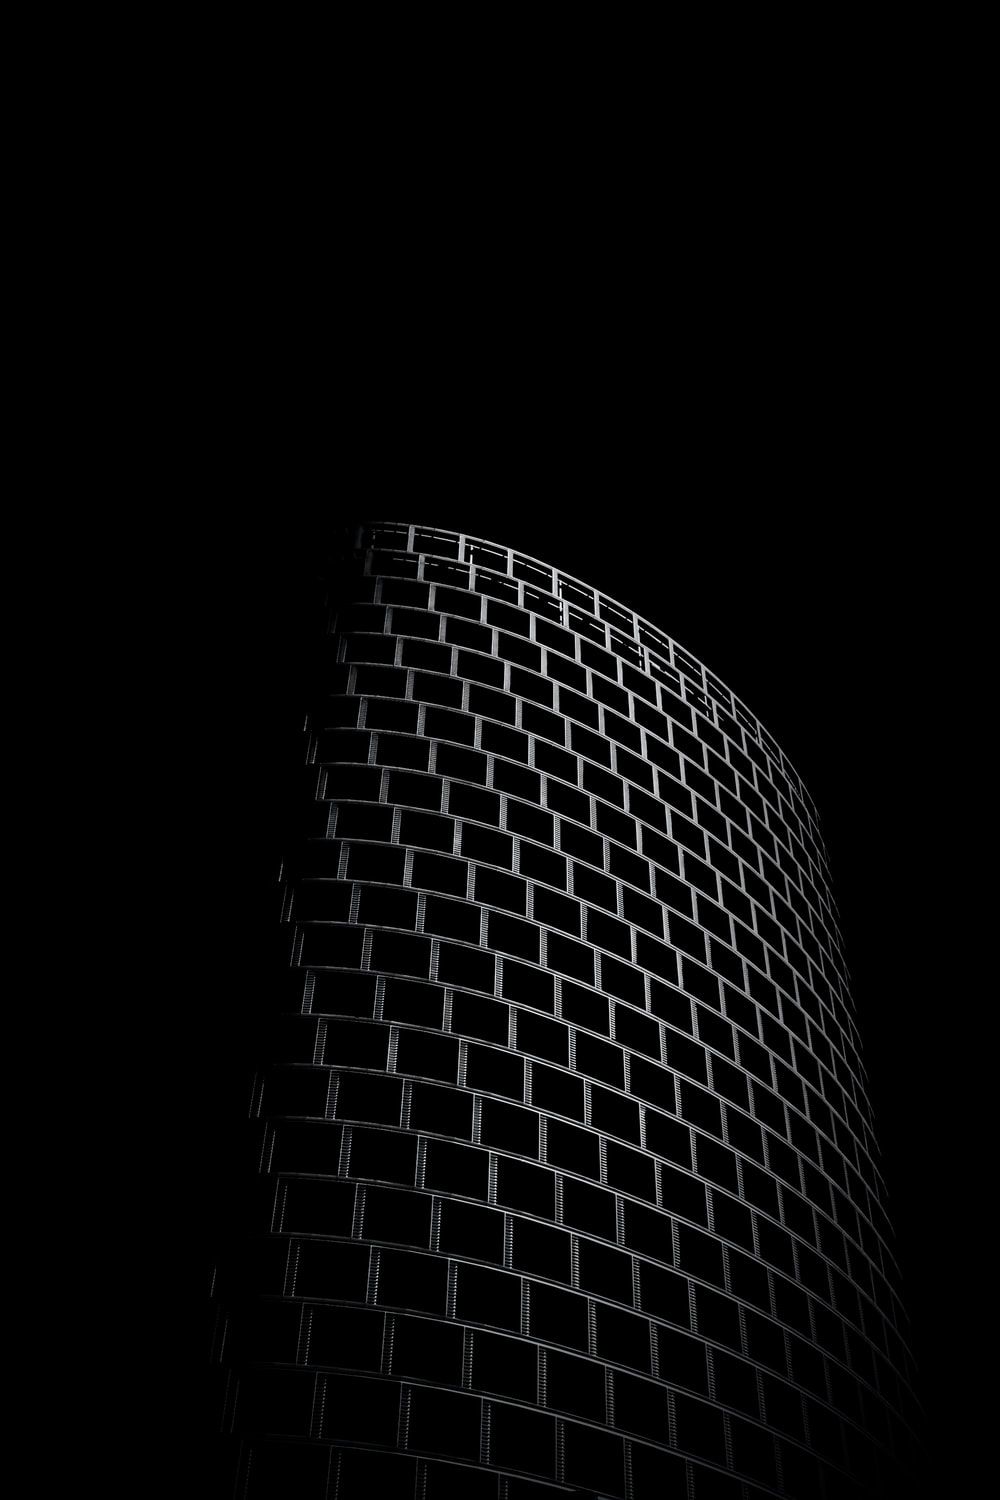 4K Wallpapers - Black Zone::Appstore for Android